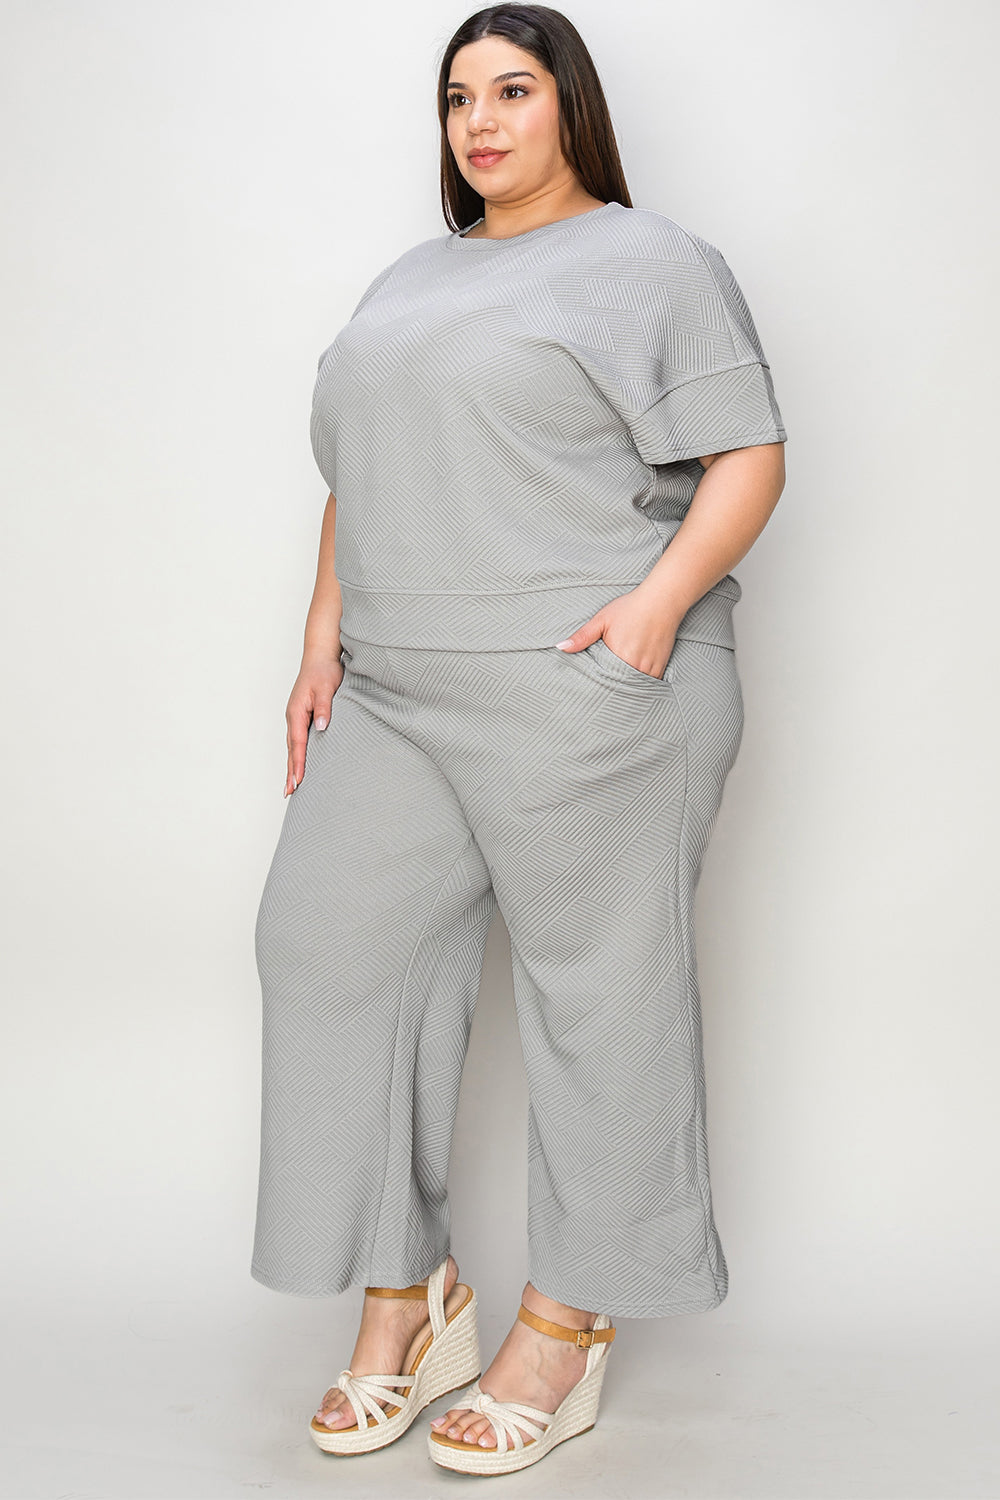 Double Take Full Size Texture Short Sleeve Top and Pants Set